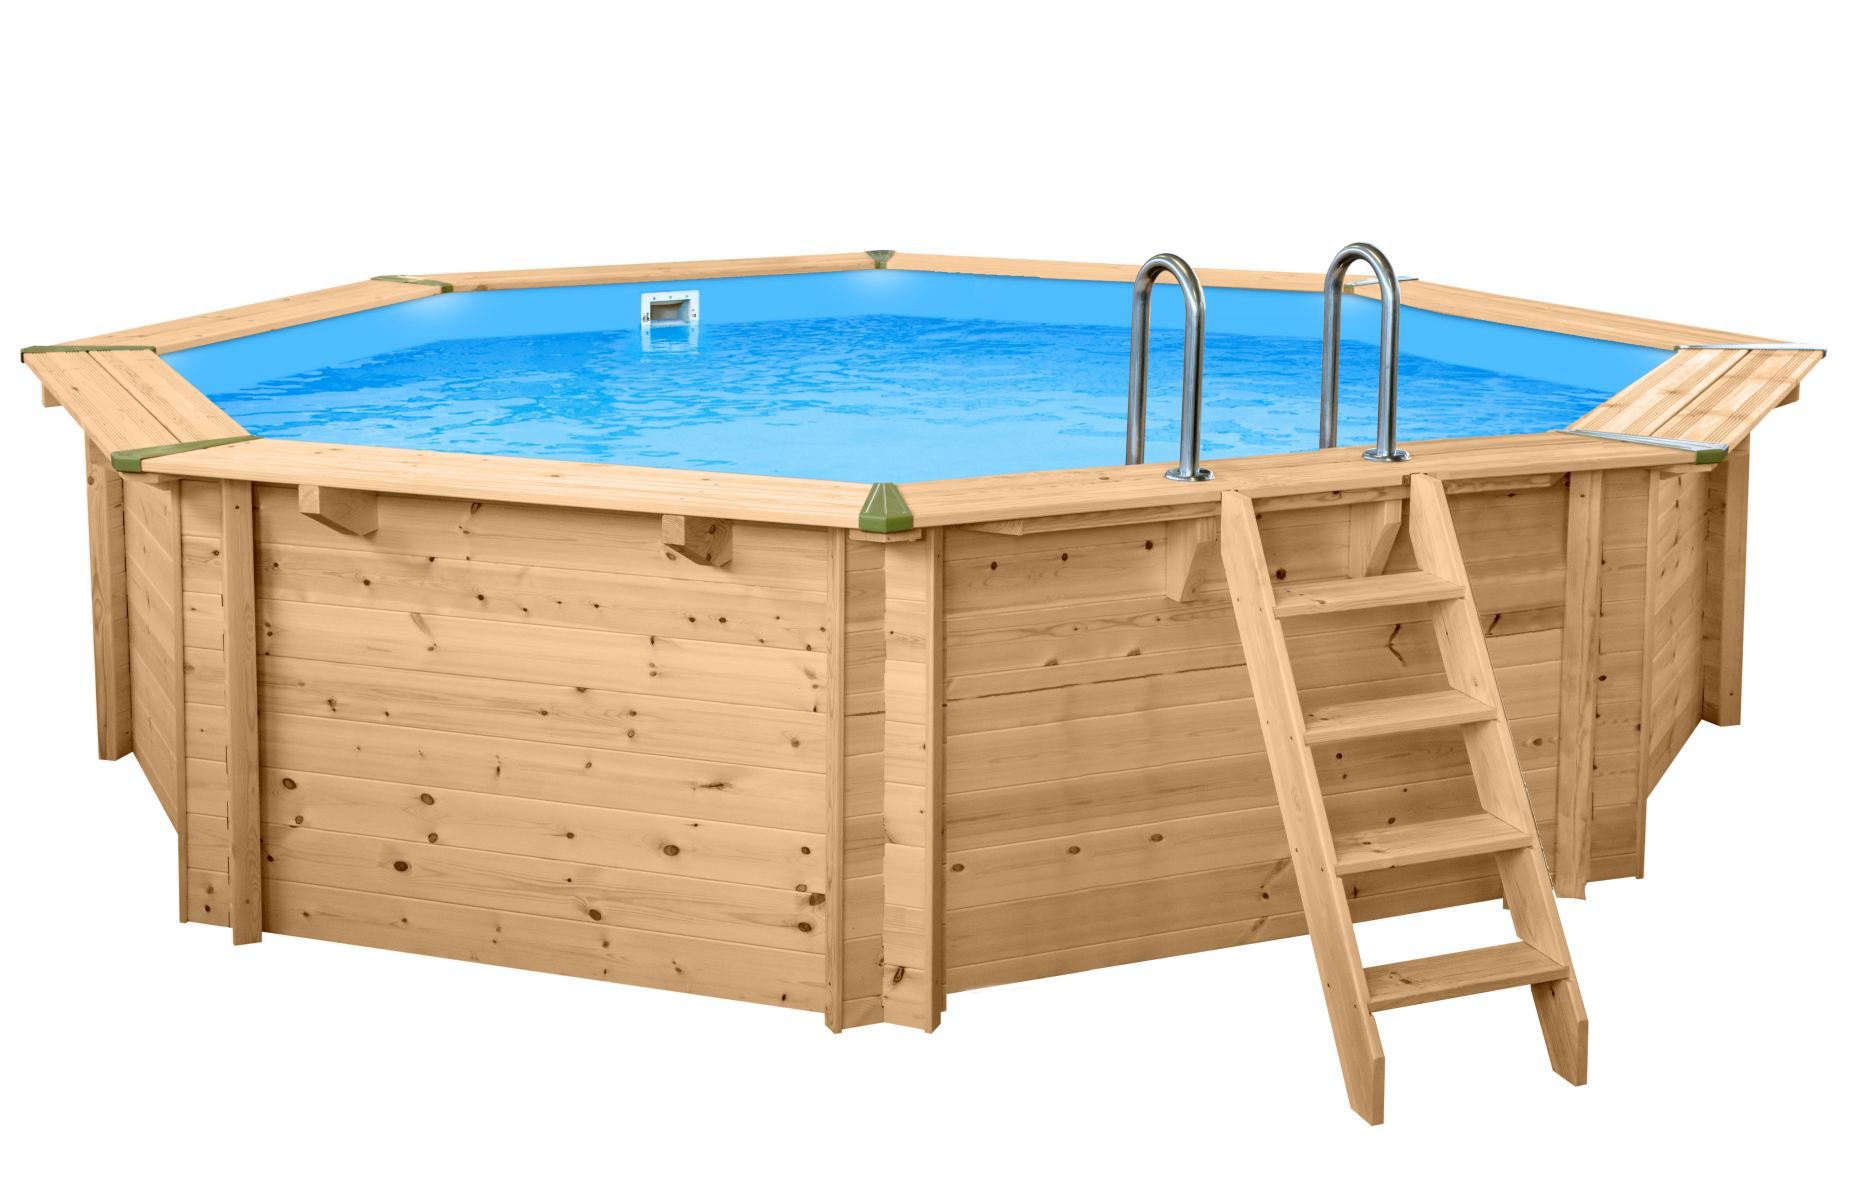 Robust Sunnydream 05 wooden pool, 6.55 x 1.36 meters, including premium filter system, filter medium, pool ladder, pool liner, floor and wall fleece, stainless steel corner joints